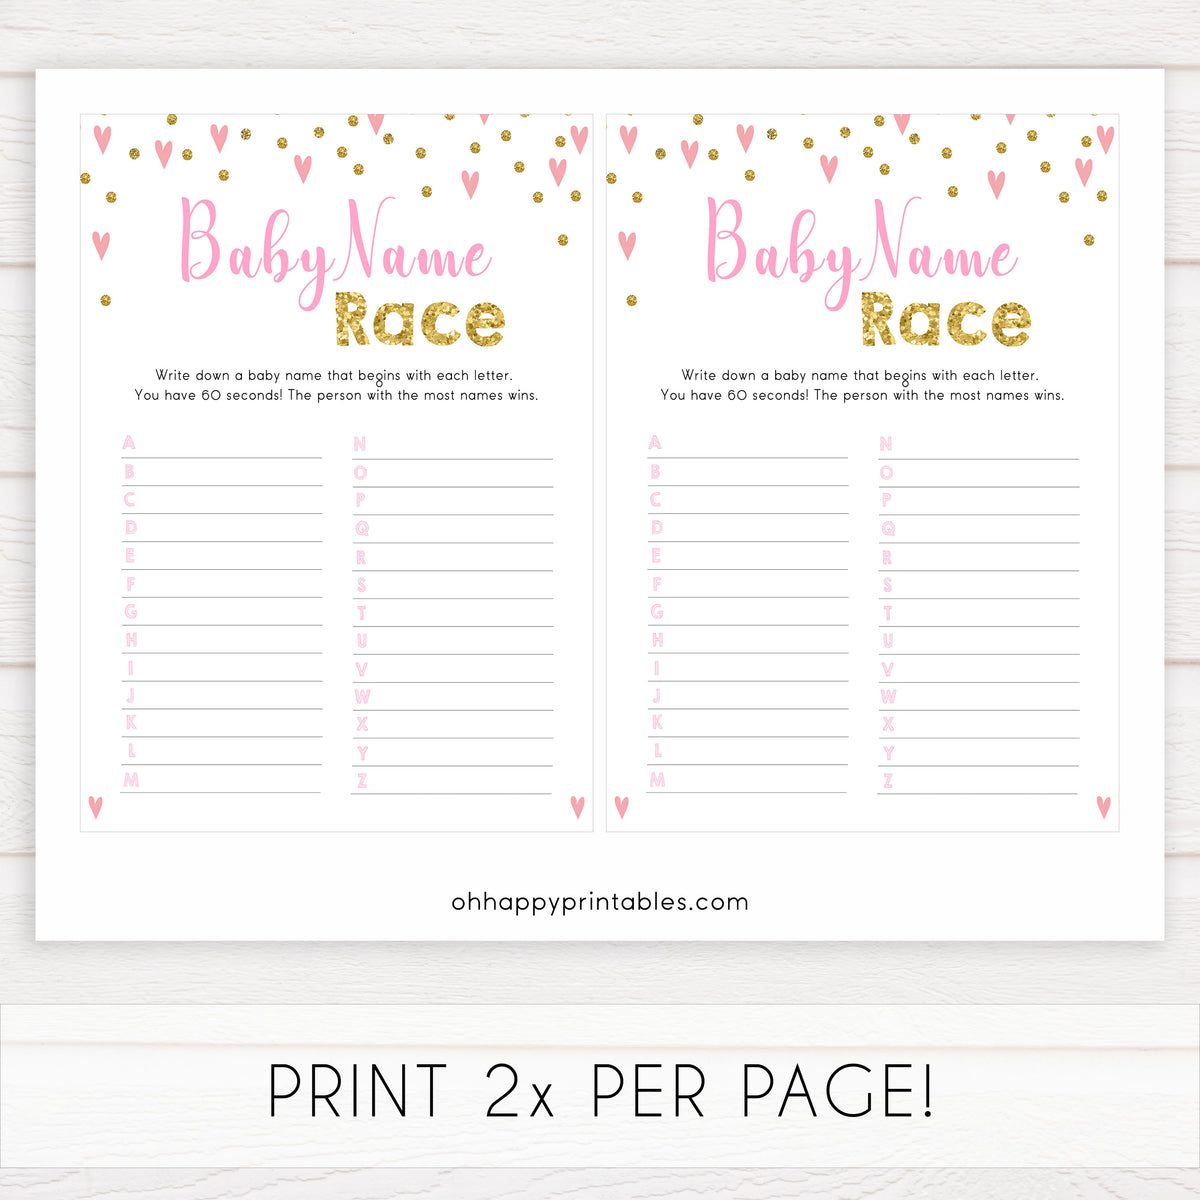 baby-name-race-game-printable-pink-baby-shower-games-ohhappyprintables